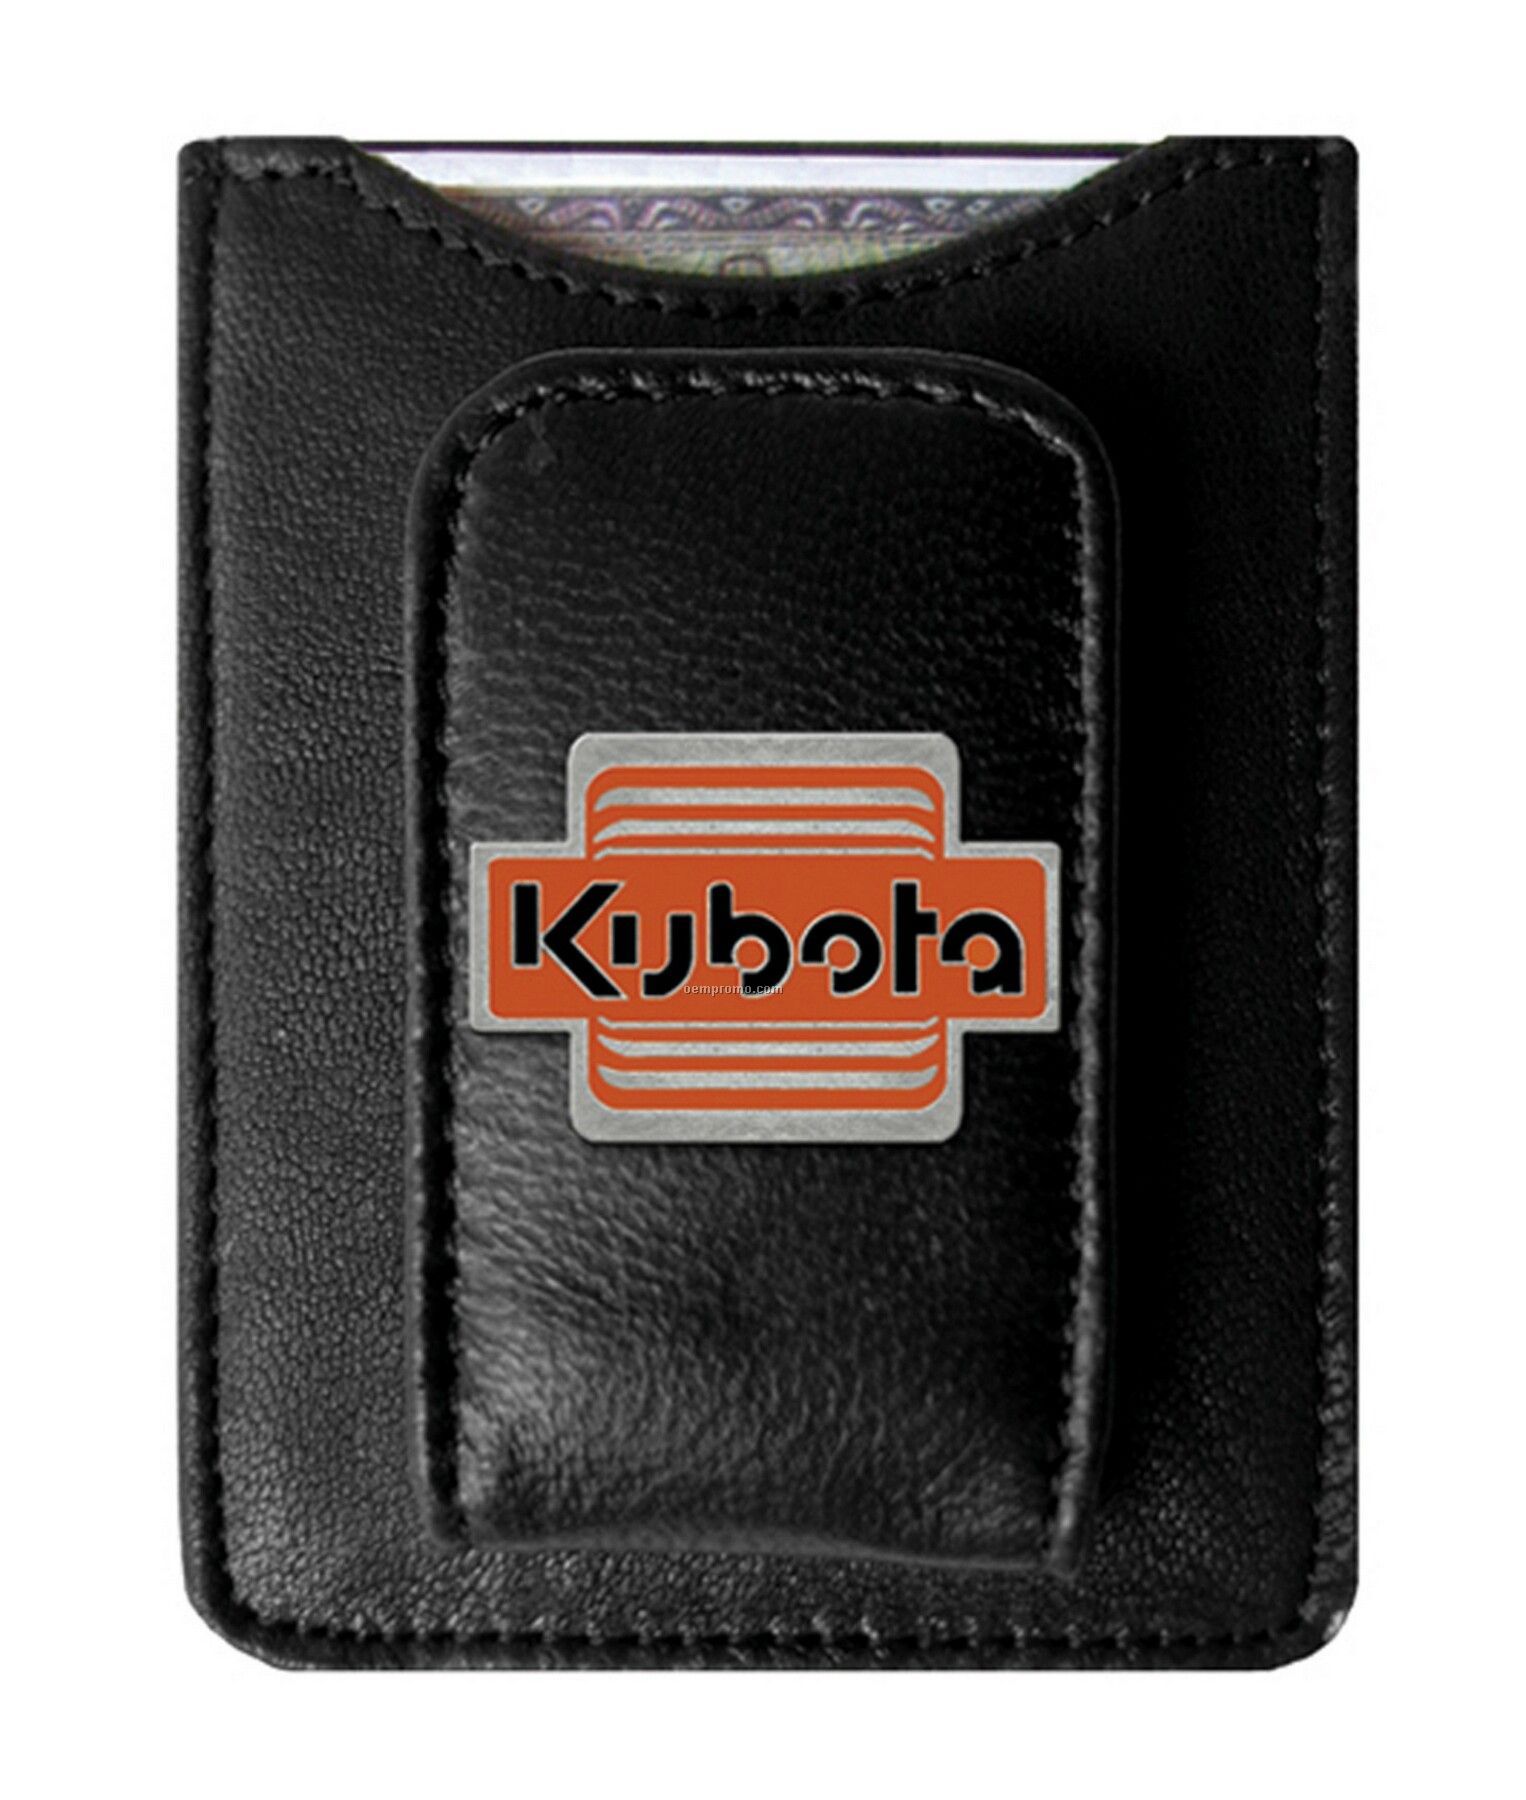 Credit Card Holder / Money Clip With 1" Applique